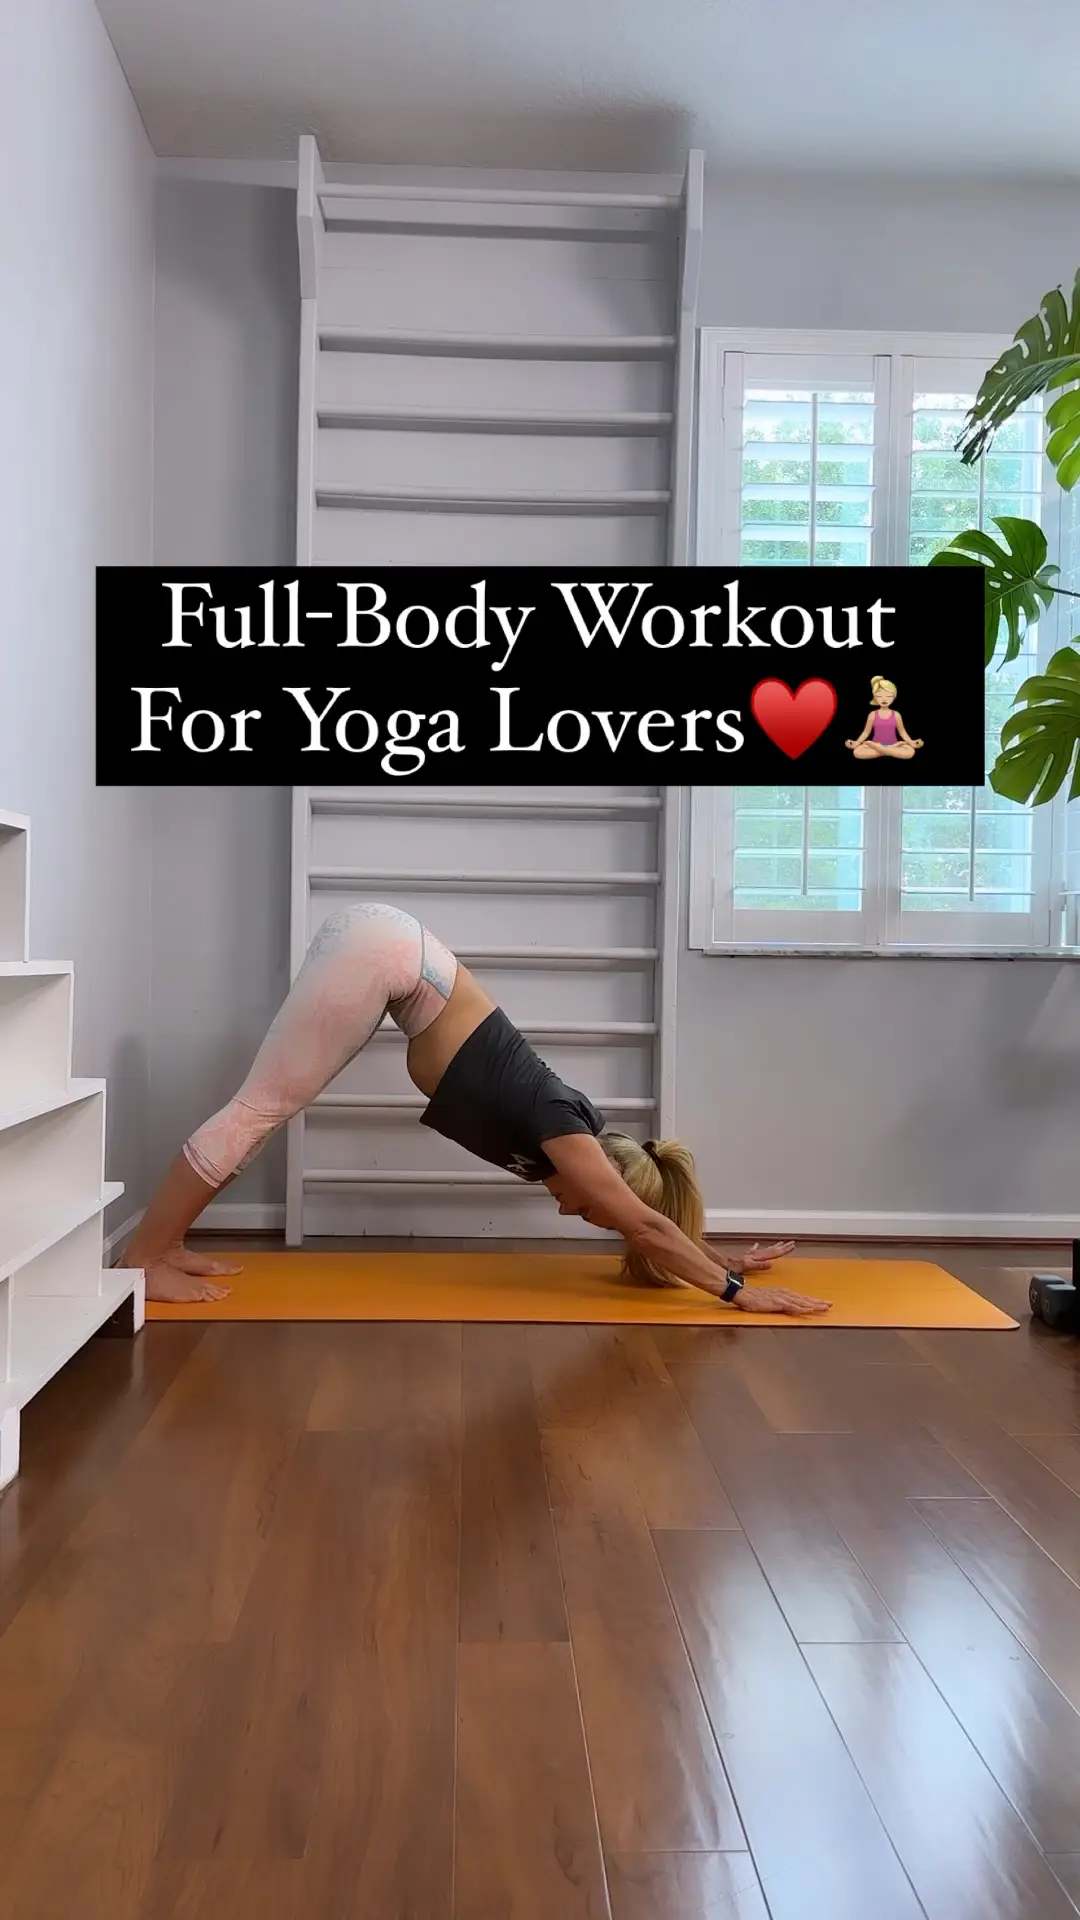 Full body workout for yoga lovers!🧘🏼‍♀️♥️